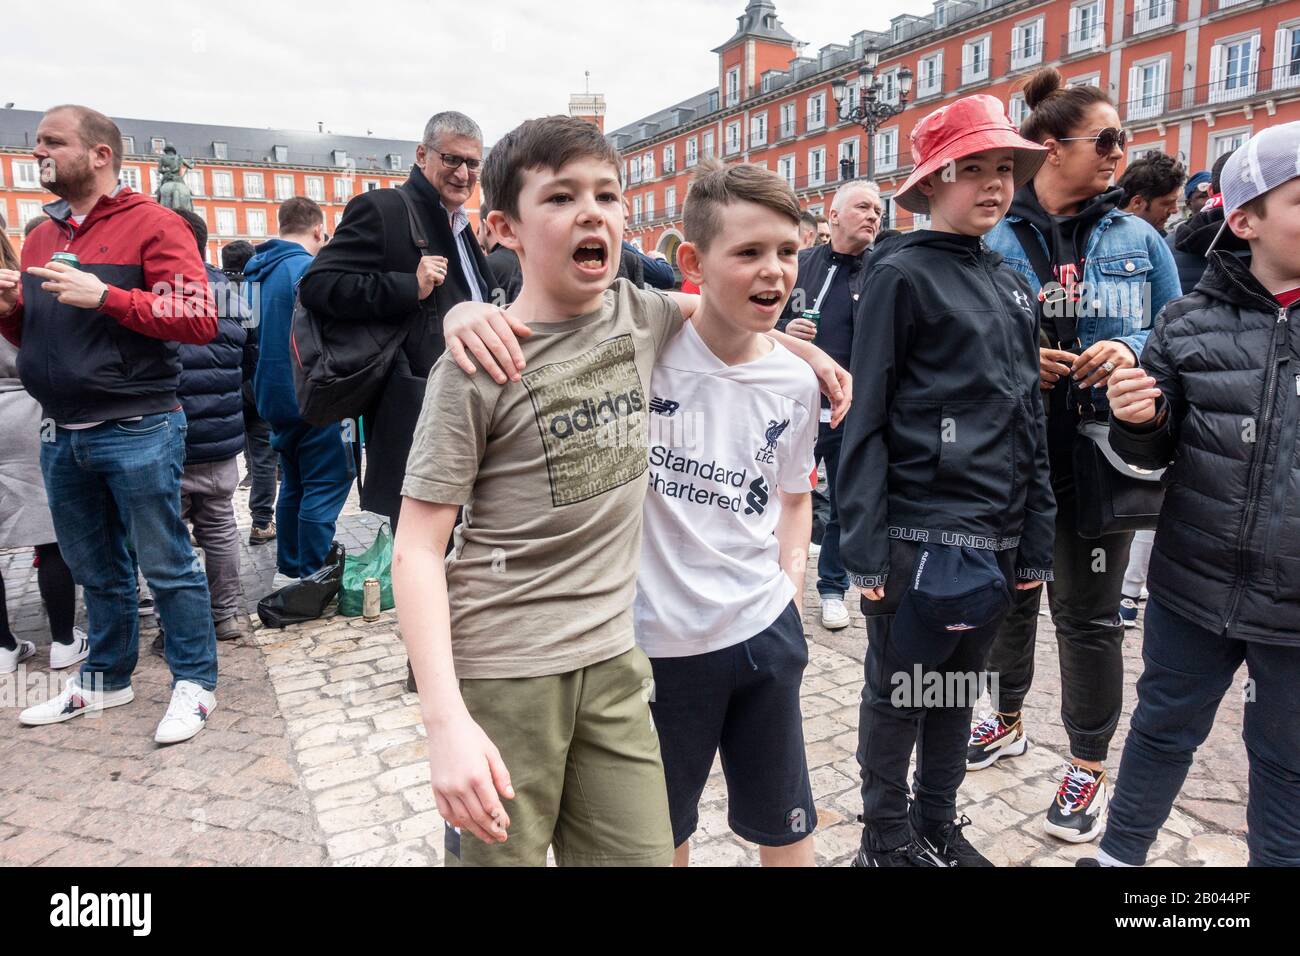 Madrid, Spain. 18th February 2020. Liverpool fans gather in Plaza Mayor in  Madrid ahead of Liverpool's last 16 Champions league game against Atletico  Madrid. Credit: Alan Dawson/Alamy Live News Stock Photo - Alamy